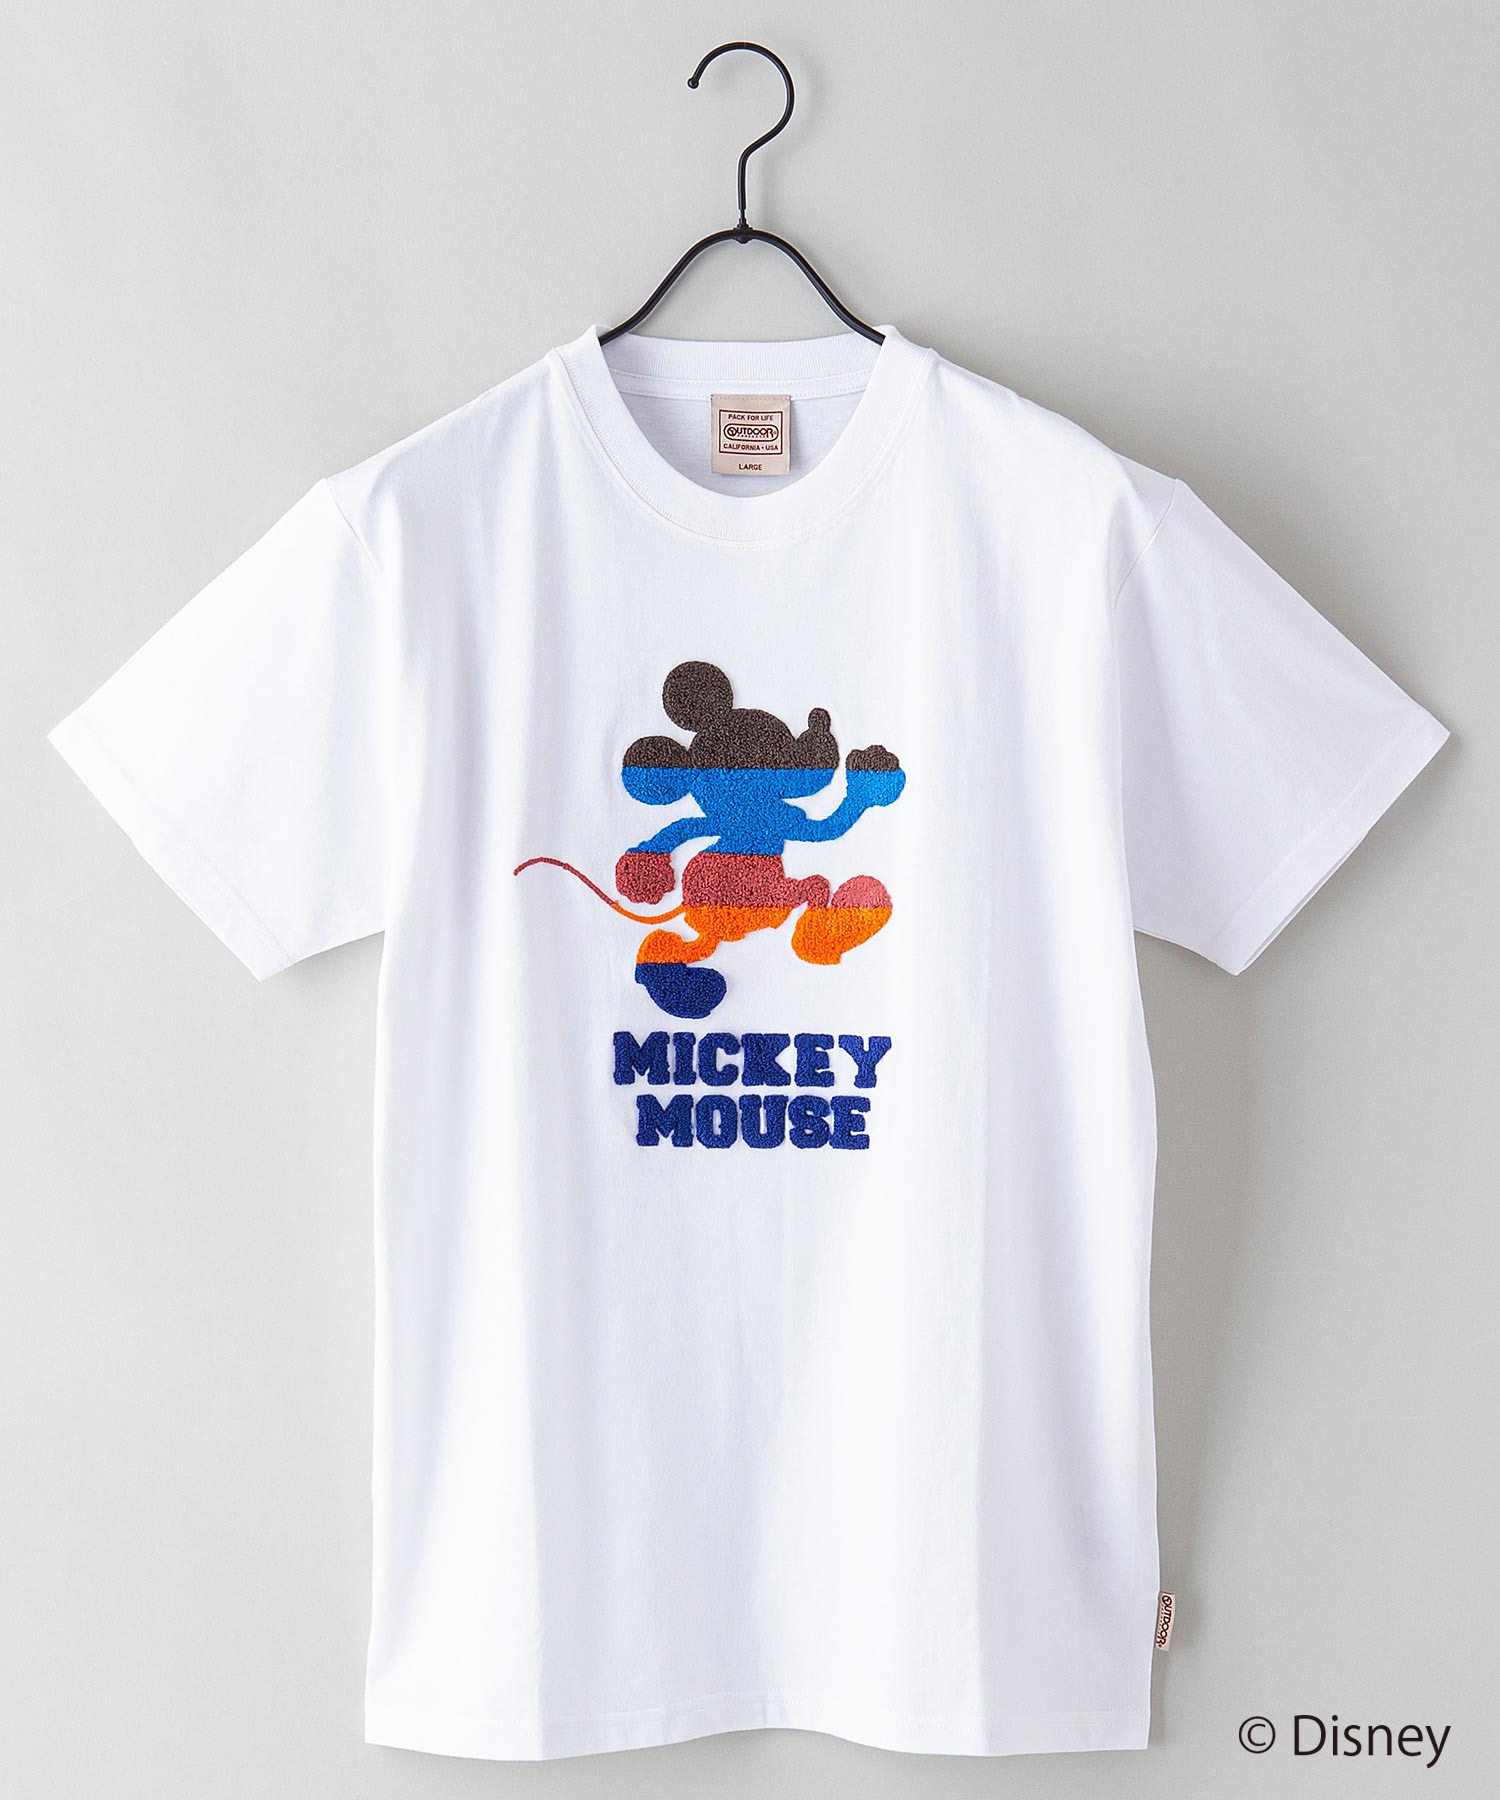 Disney ディズニー プリントｔシャツ Outdoor Products Apparel アウトドアプロダクツ Outdoor Products 公式通販サイト